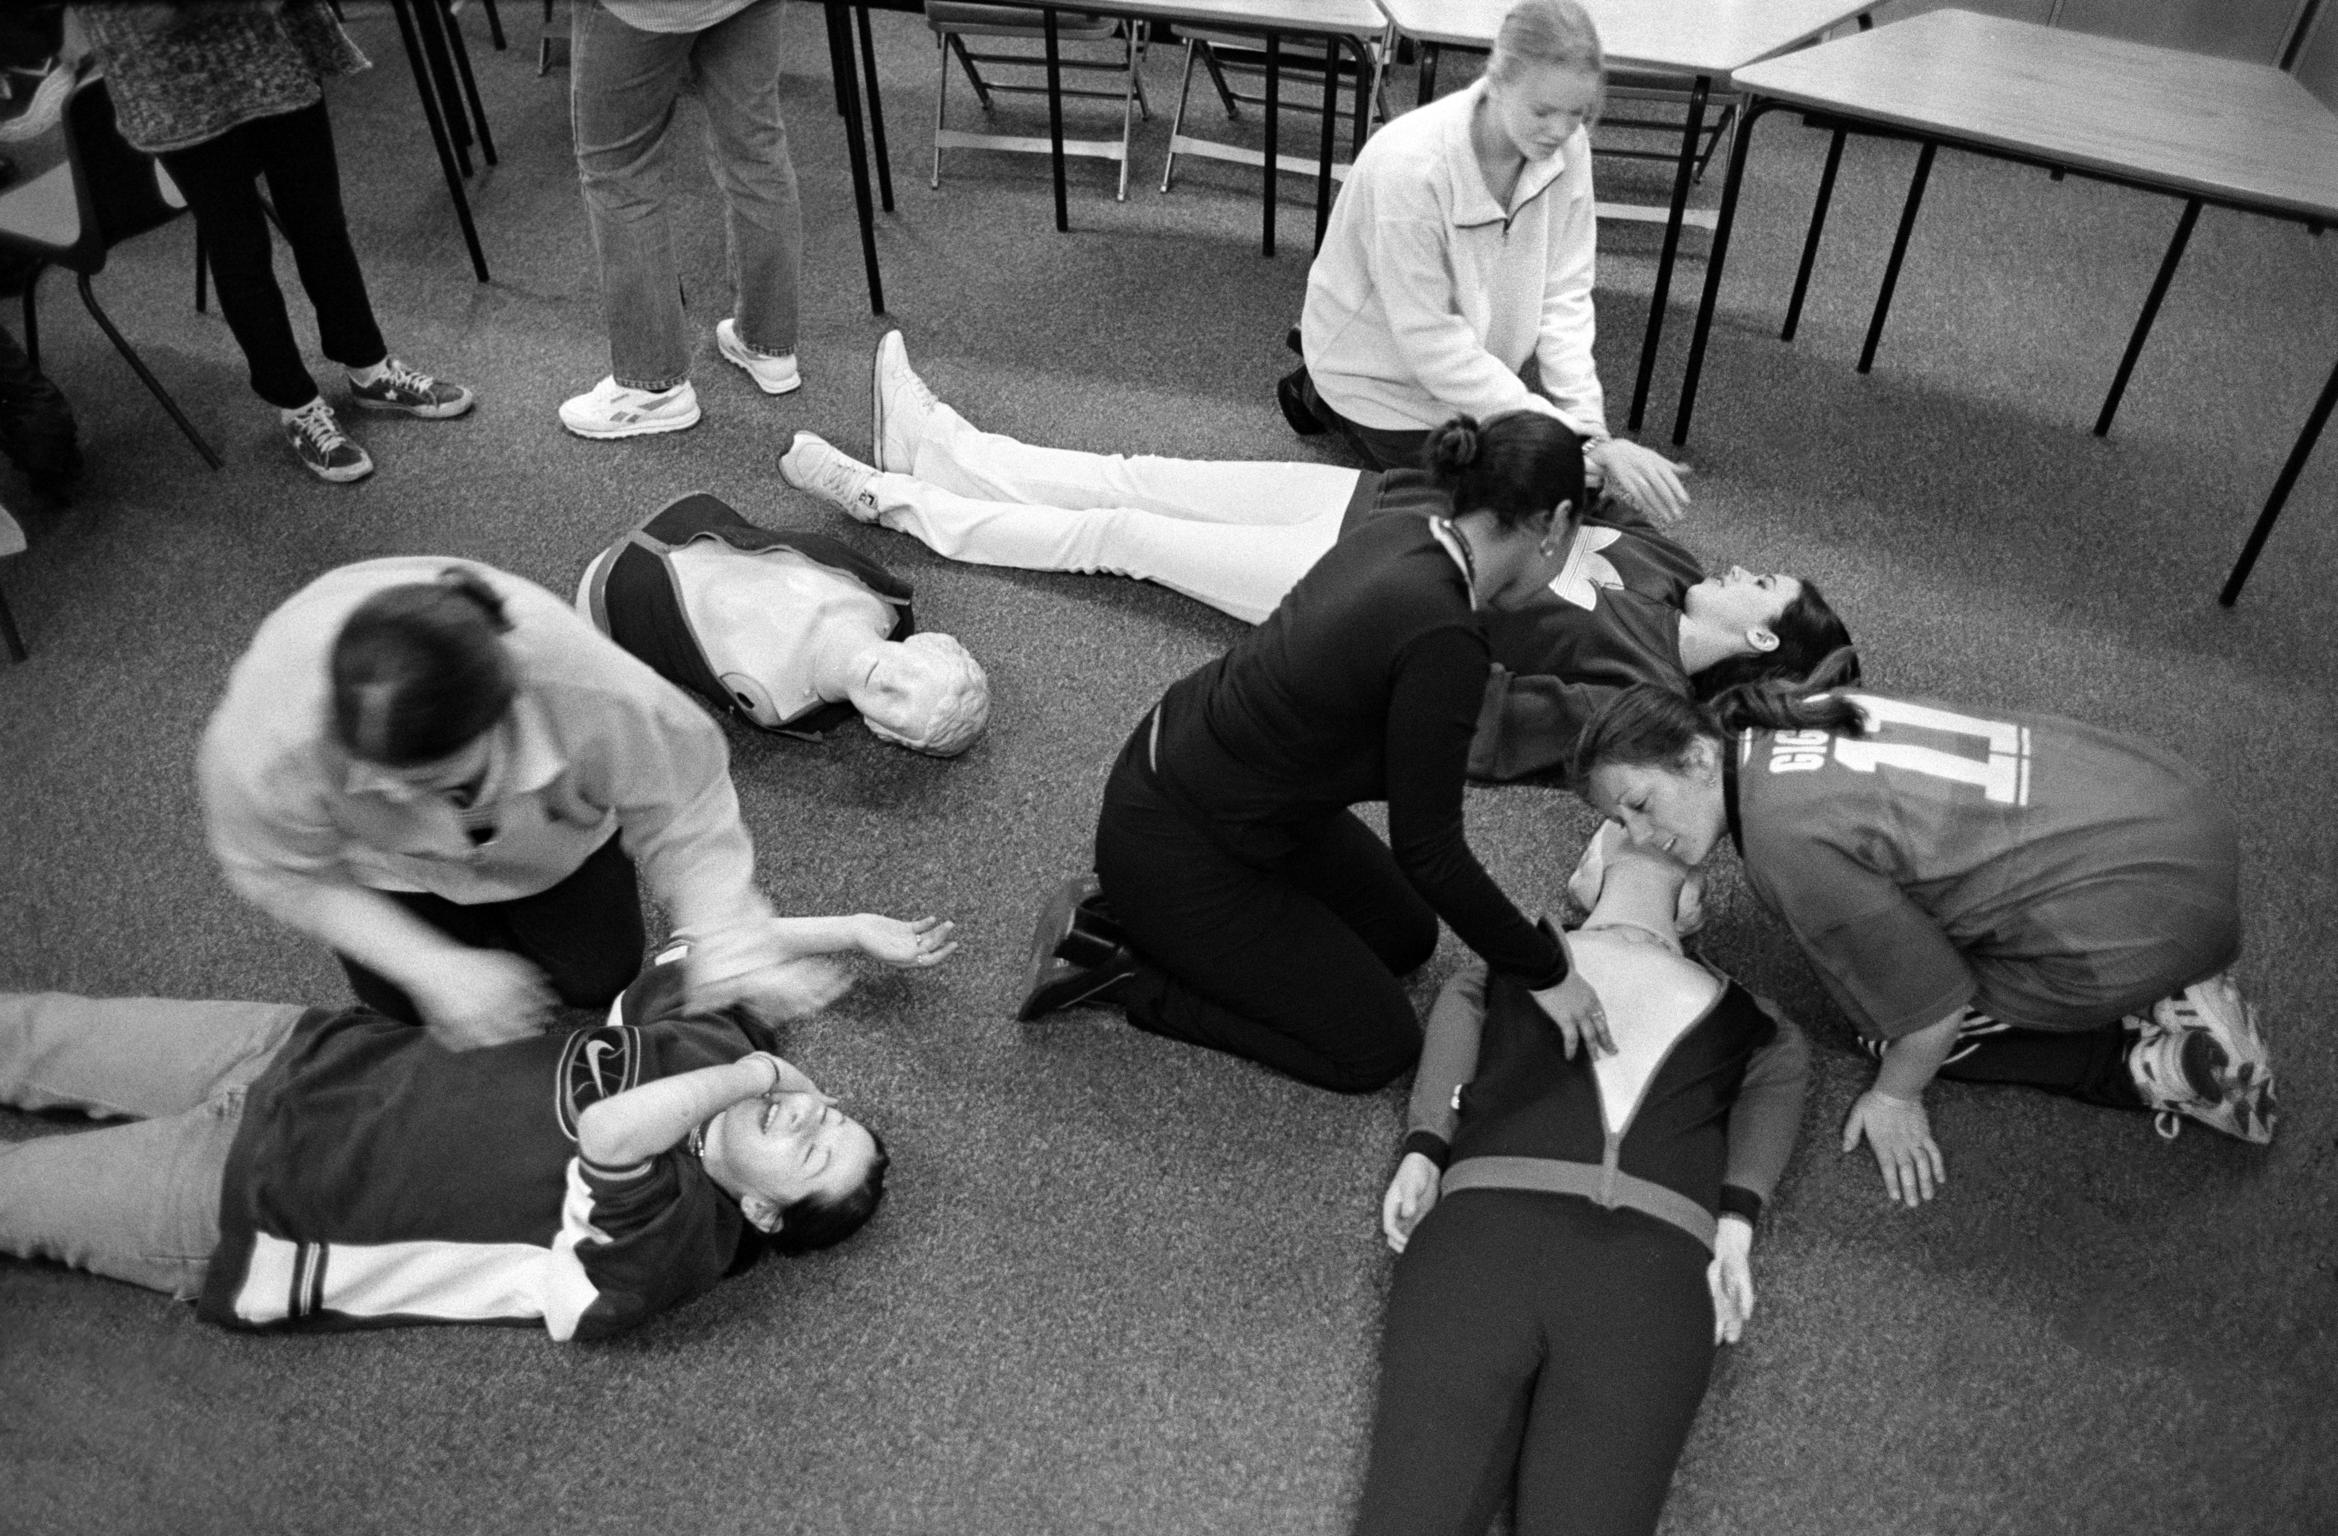 First aid class at the Tertiary college. Rumney, Wales